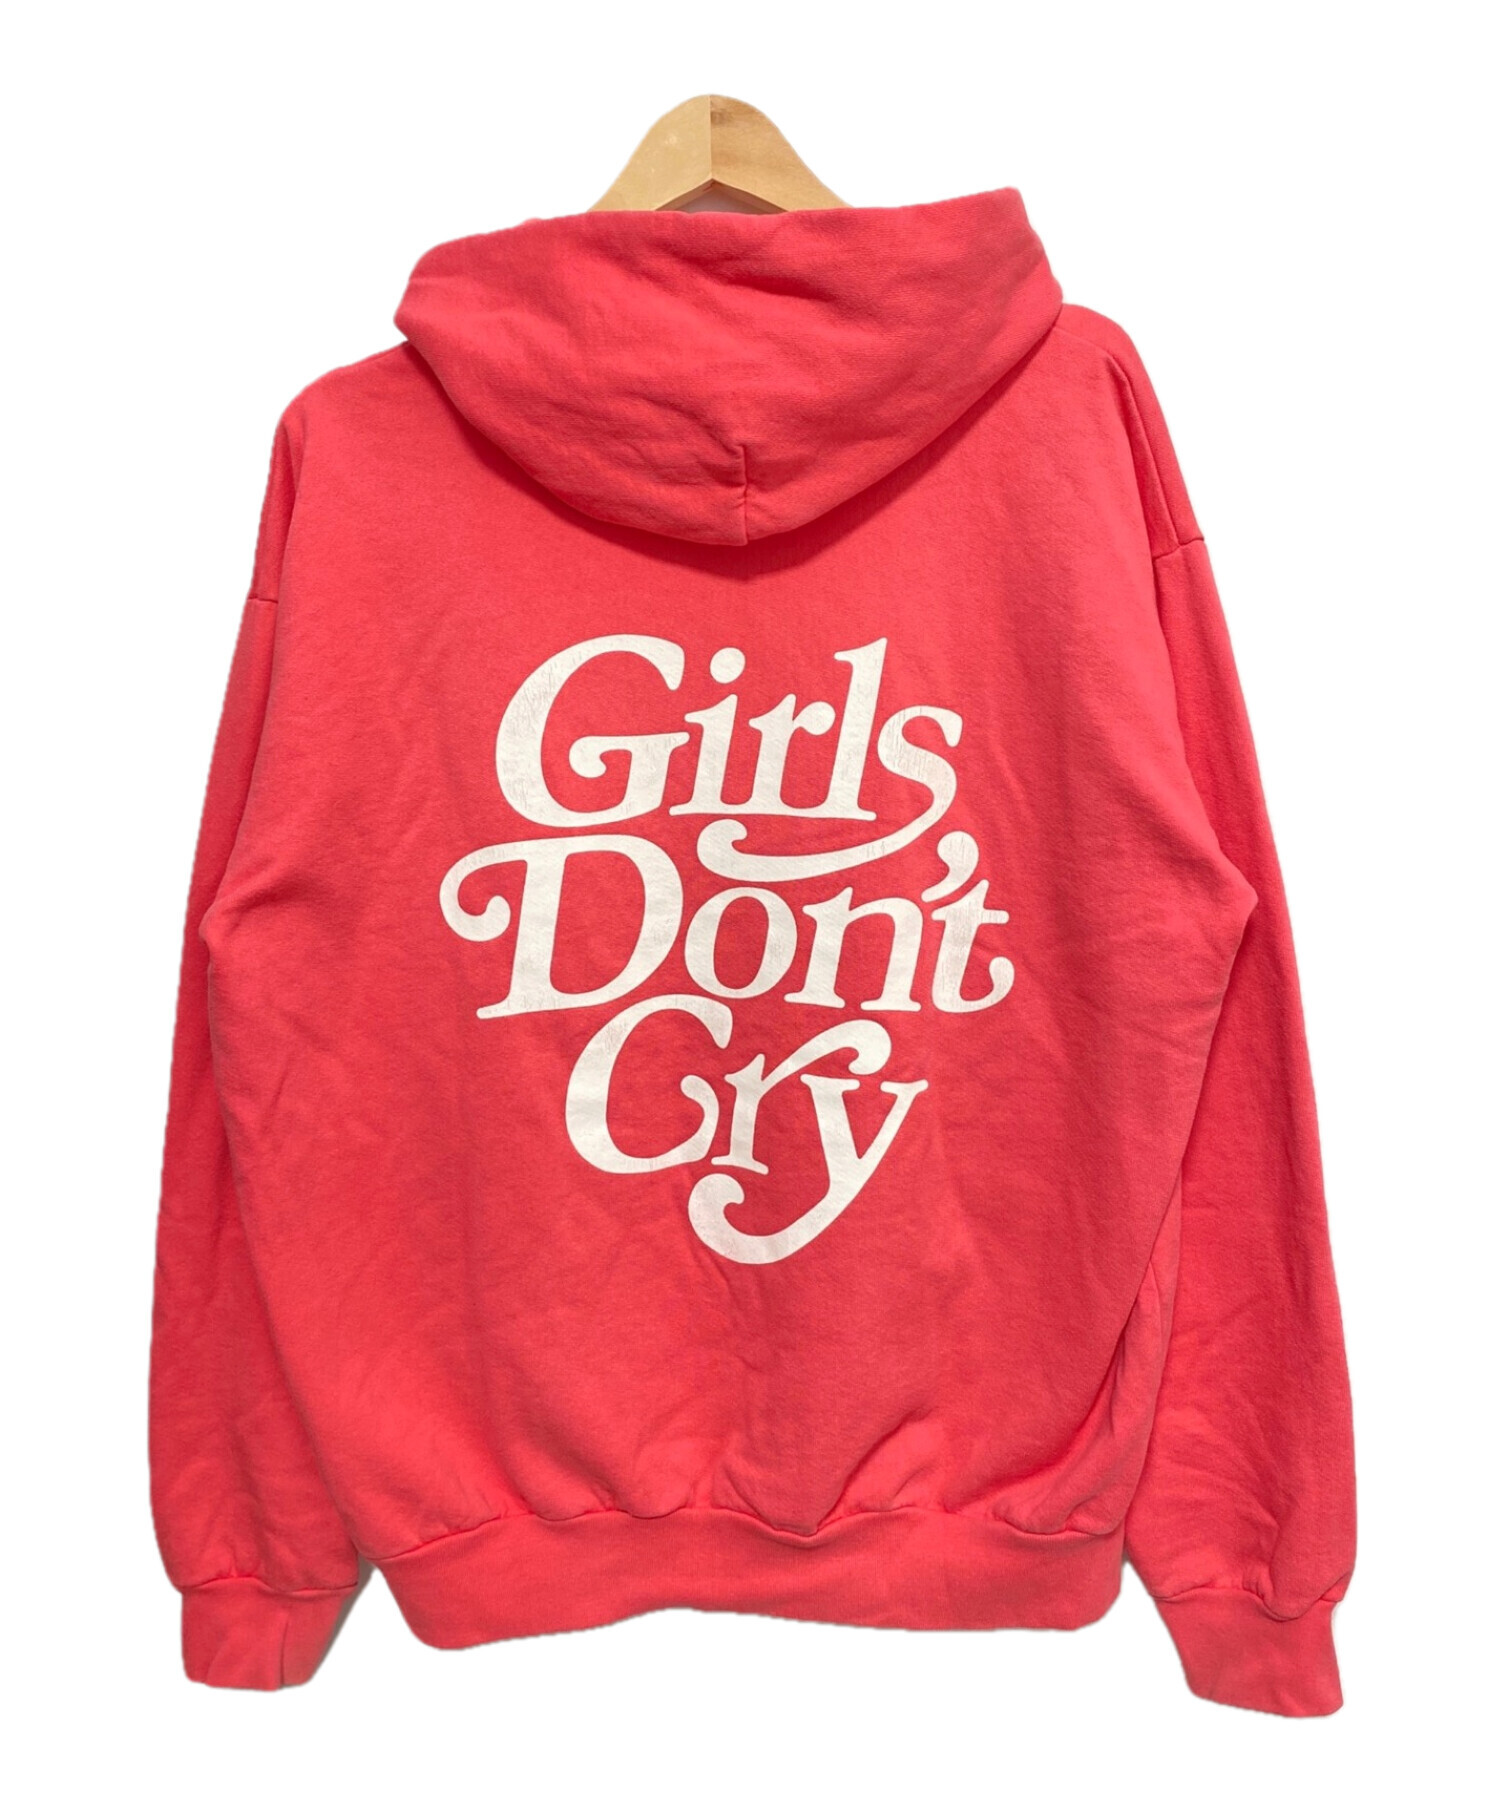 [XL] Girls don't cry パーカーNCN